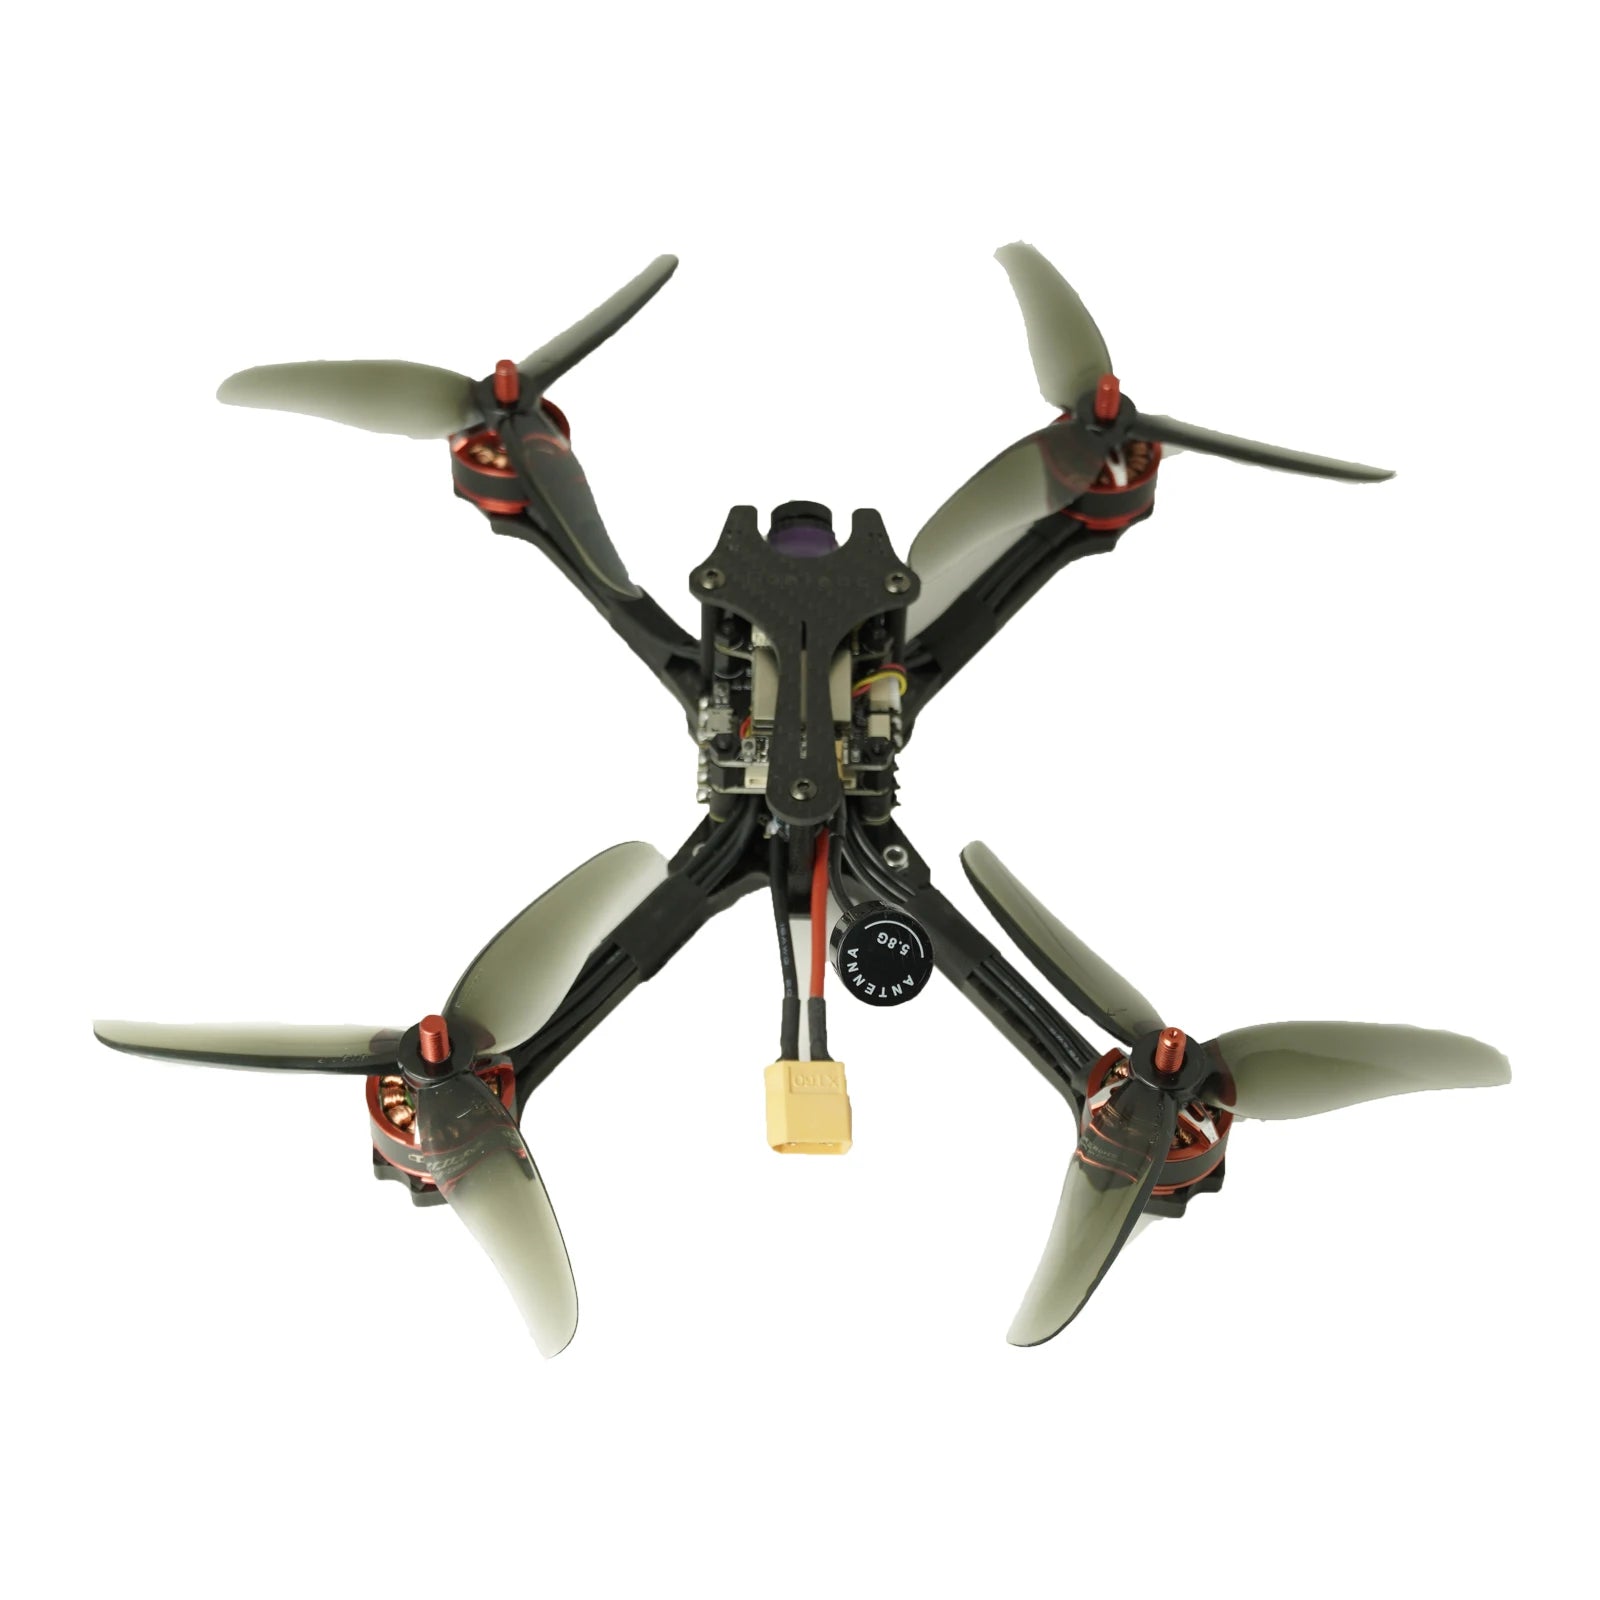 TCMMRC Xtreme 210 Racing Drone, high-definition camera captures stunning footage, allowing pilots to relive